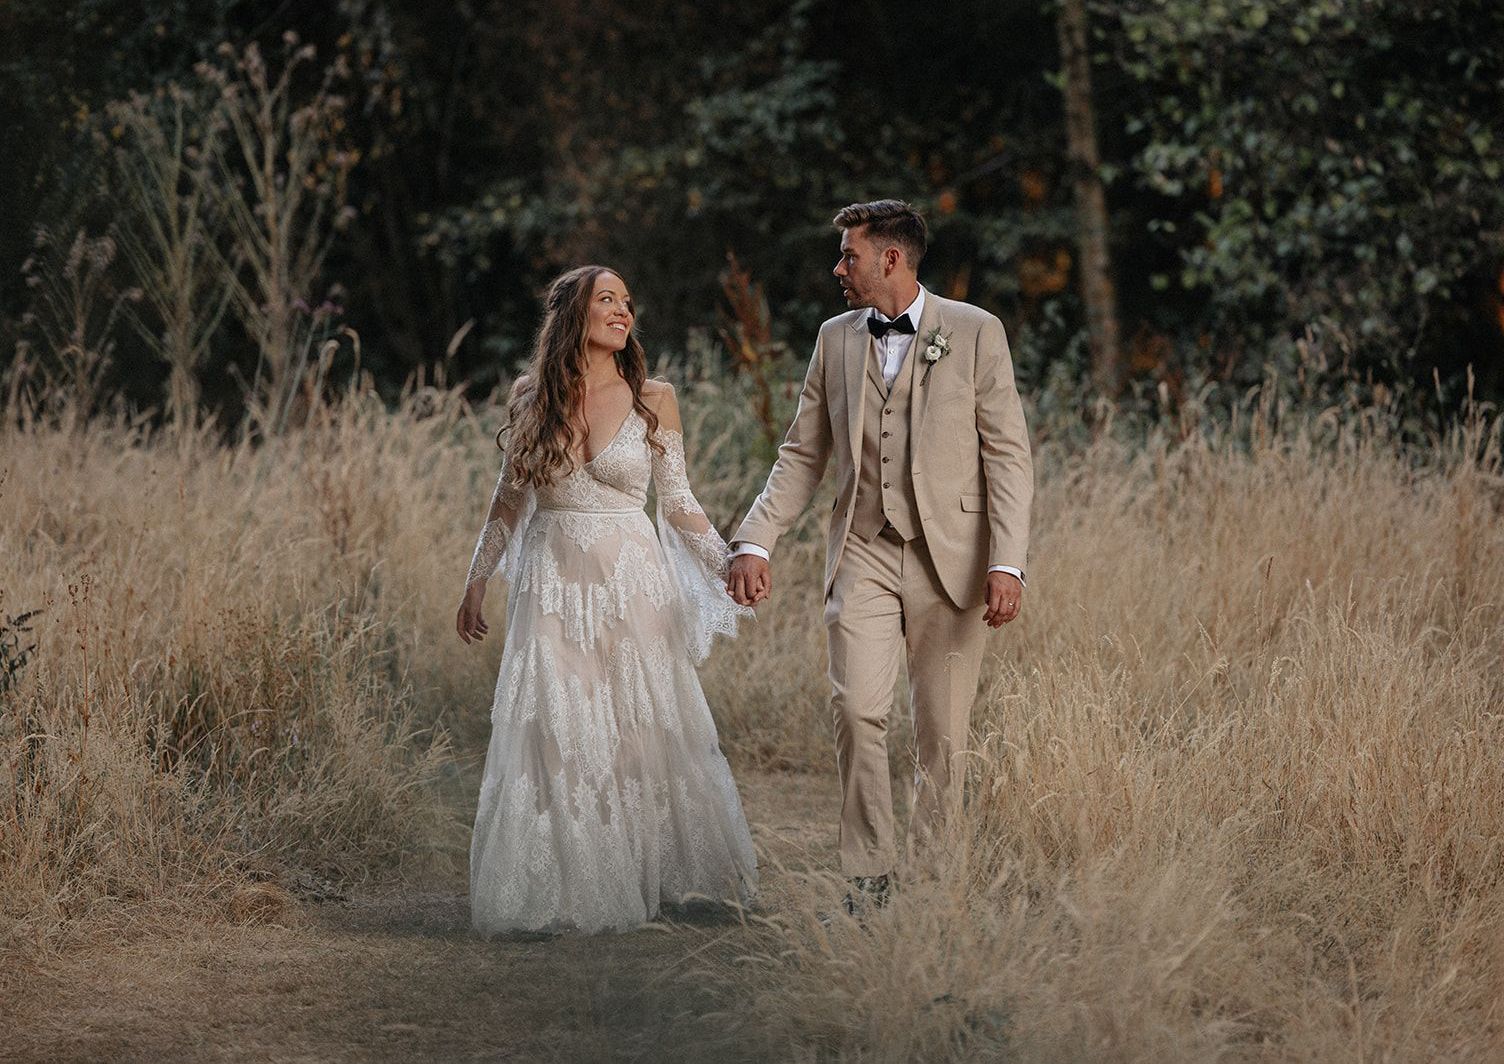 A bride and groom are walking through a field holding hands.